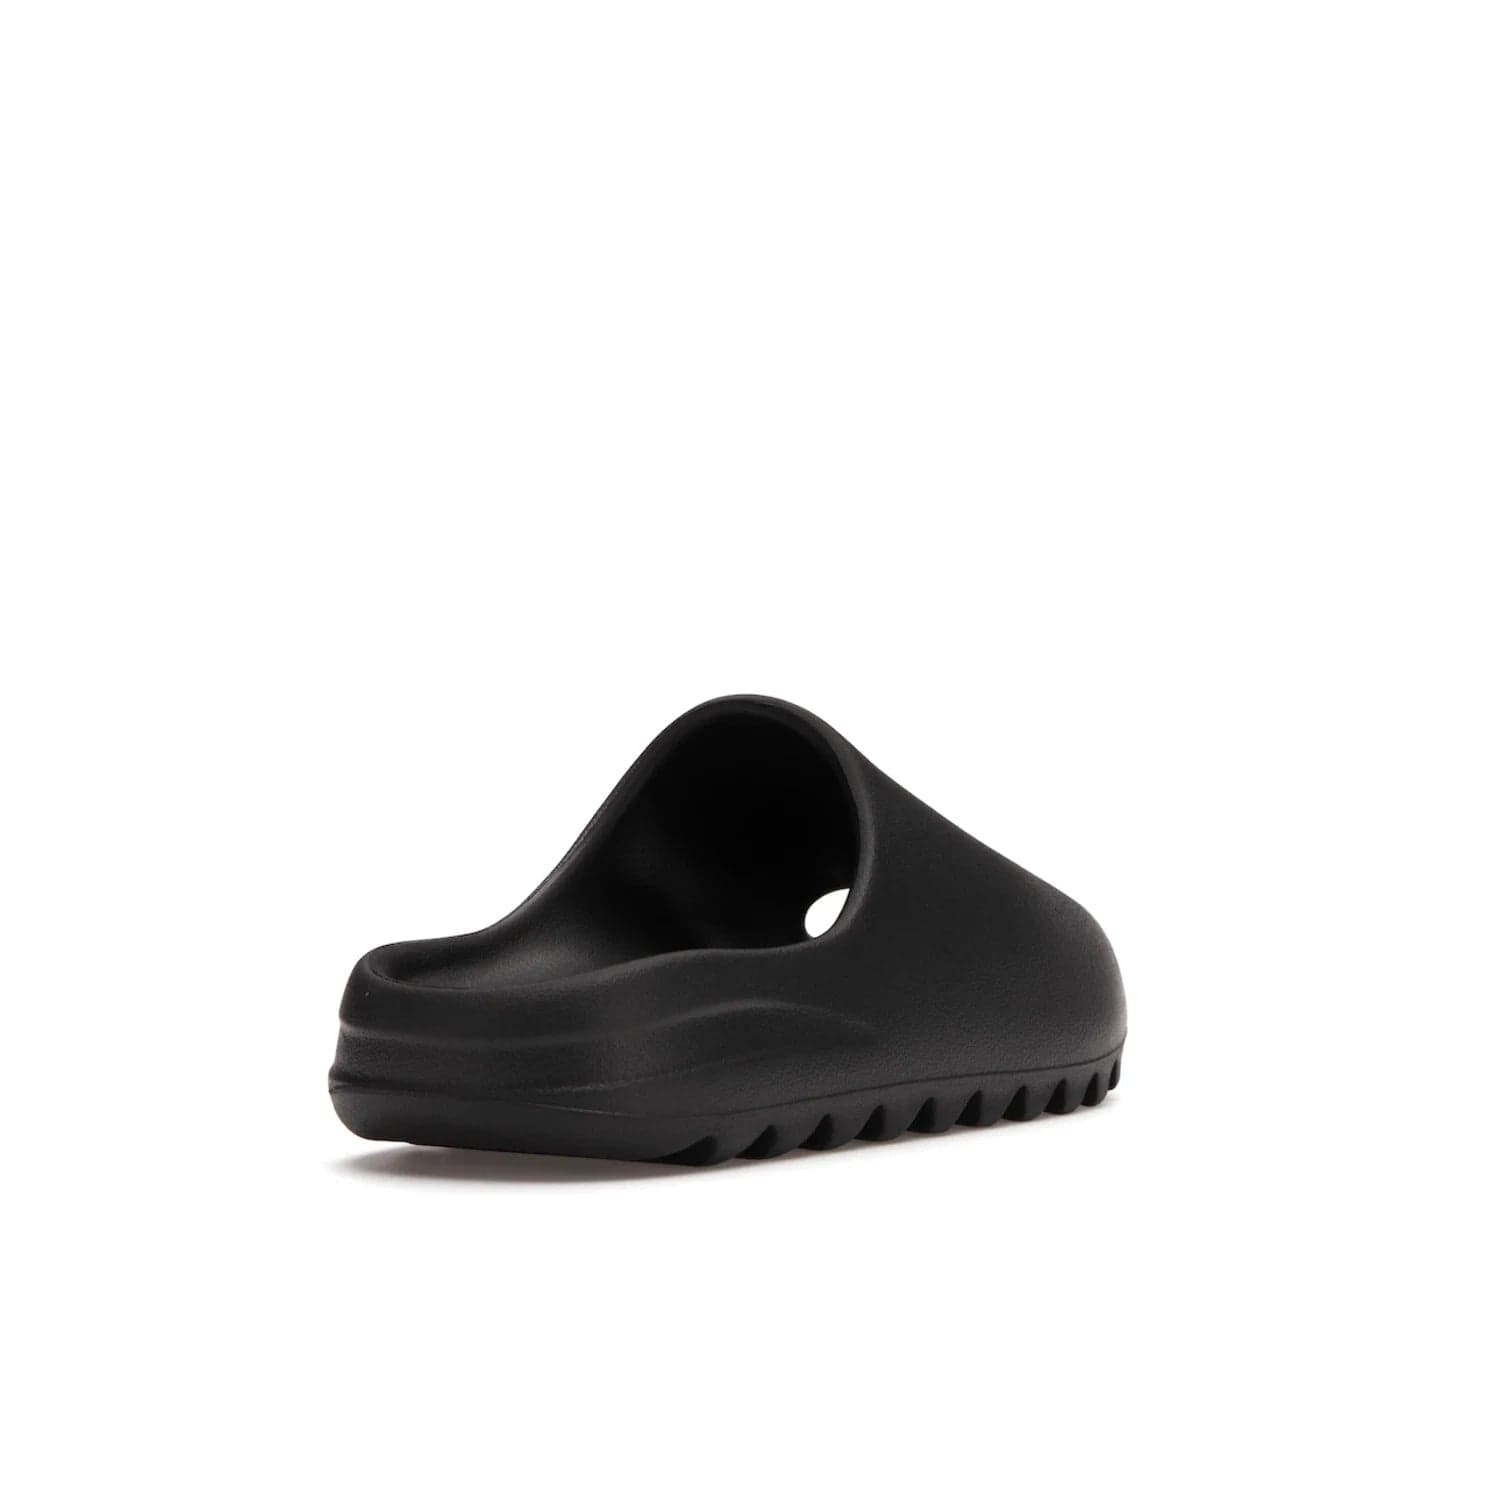 adidas Yeezy Slide Onyx - Image 31 - Only at www.BallersClubKickz.com - Step into comfort and style with the adidas Yeezy Slide Onyx. Featuring foam construction, an all-black colorway and a grooved outsole for stability and responsiveness, this versatile slide is a must-have for your collection.